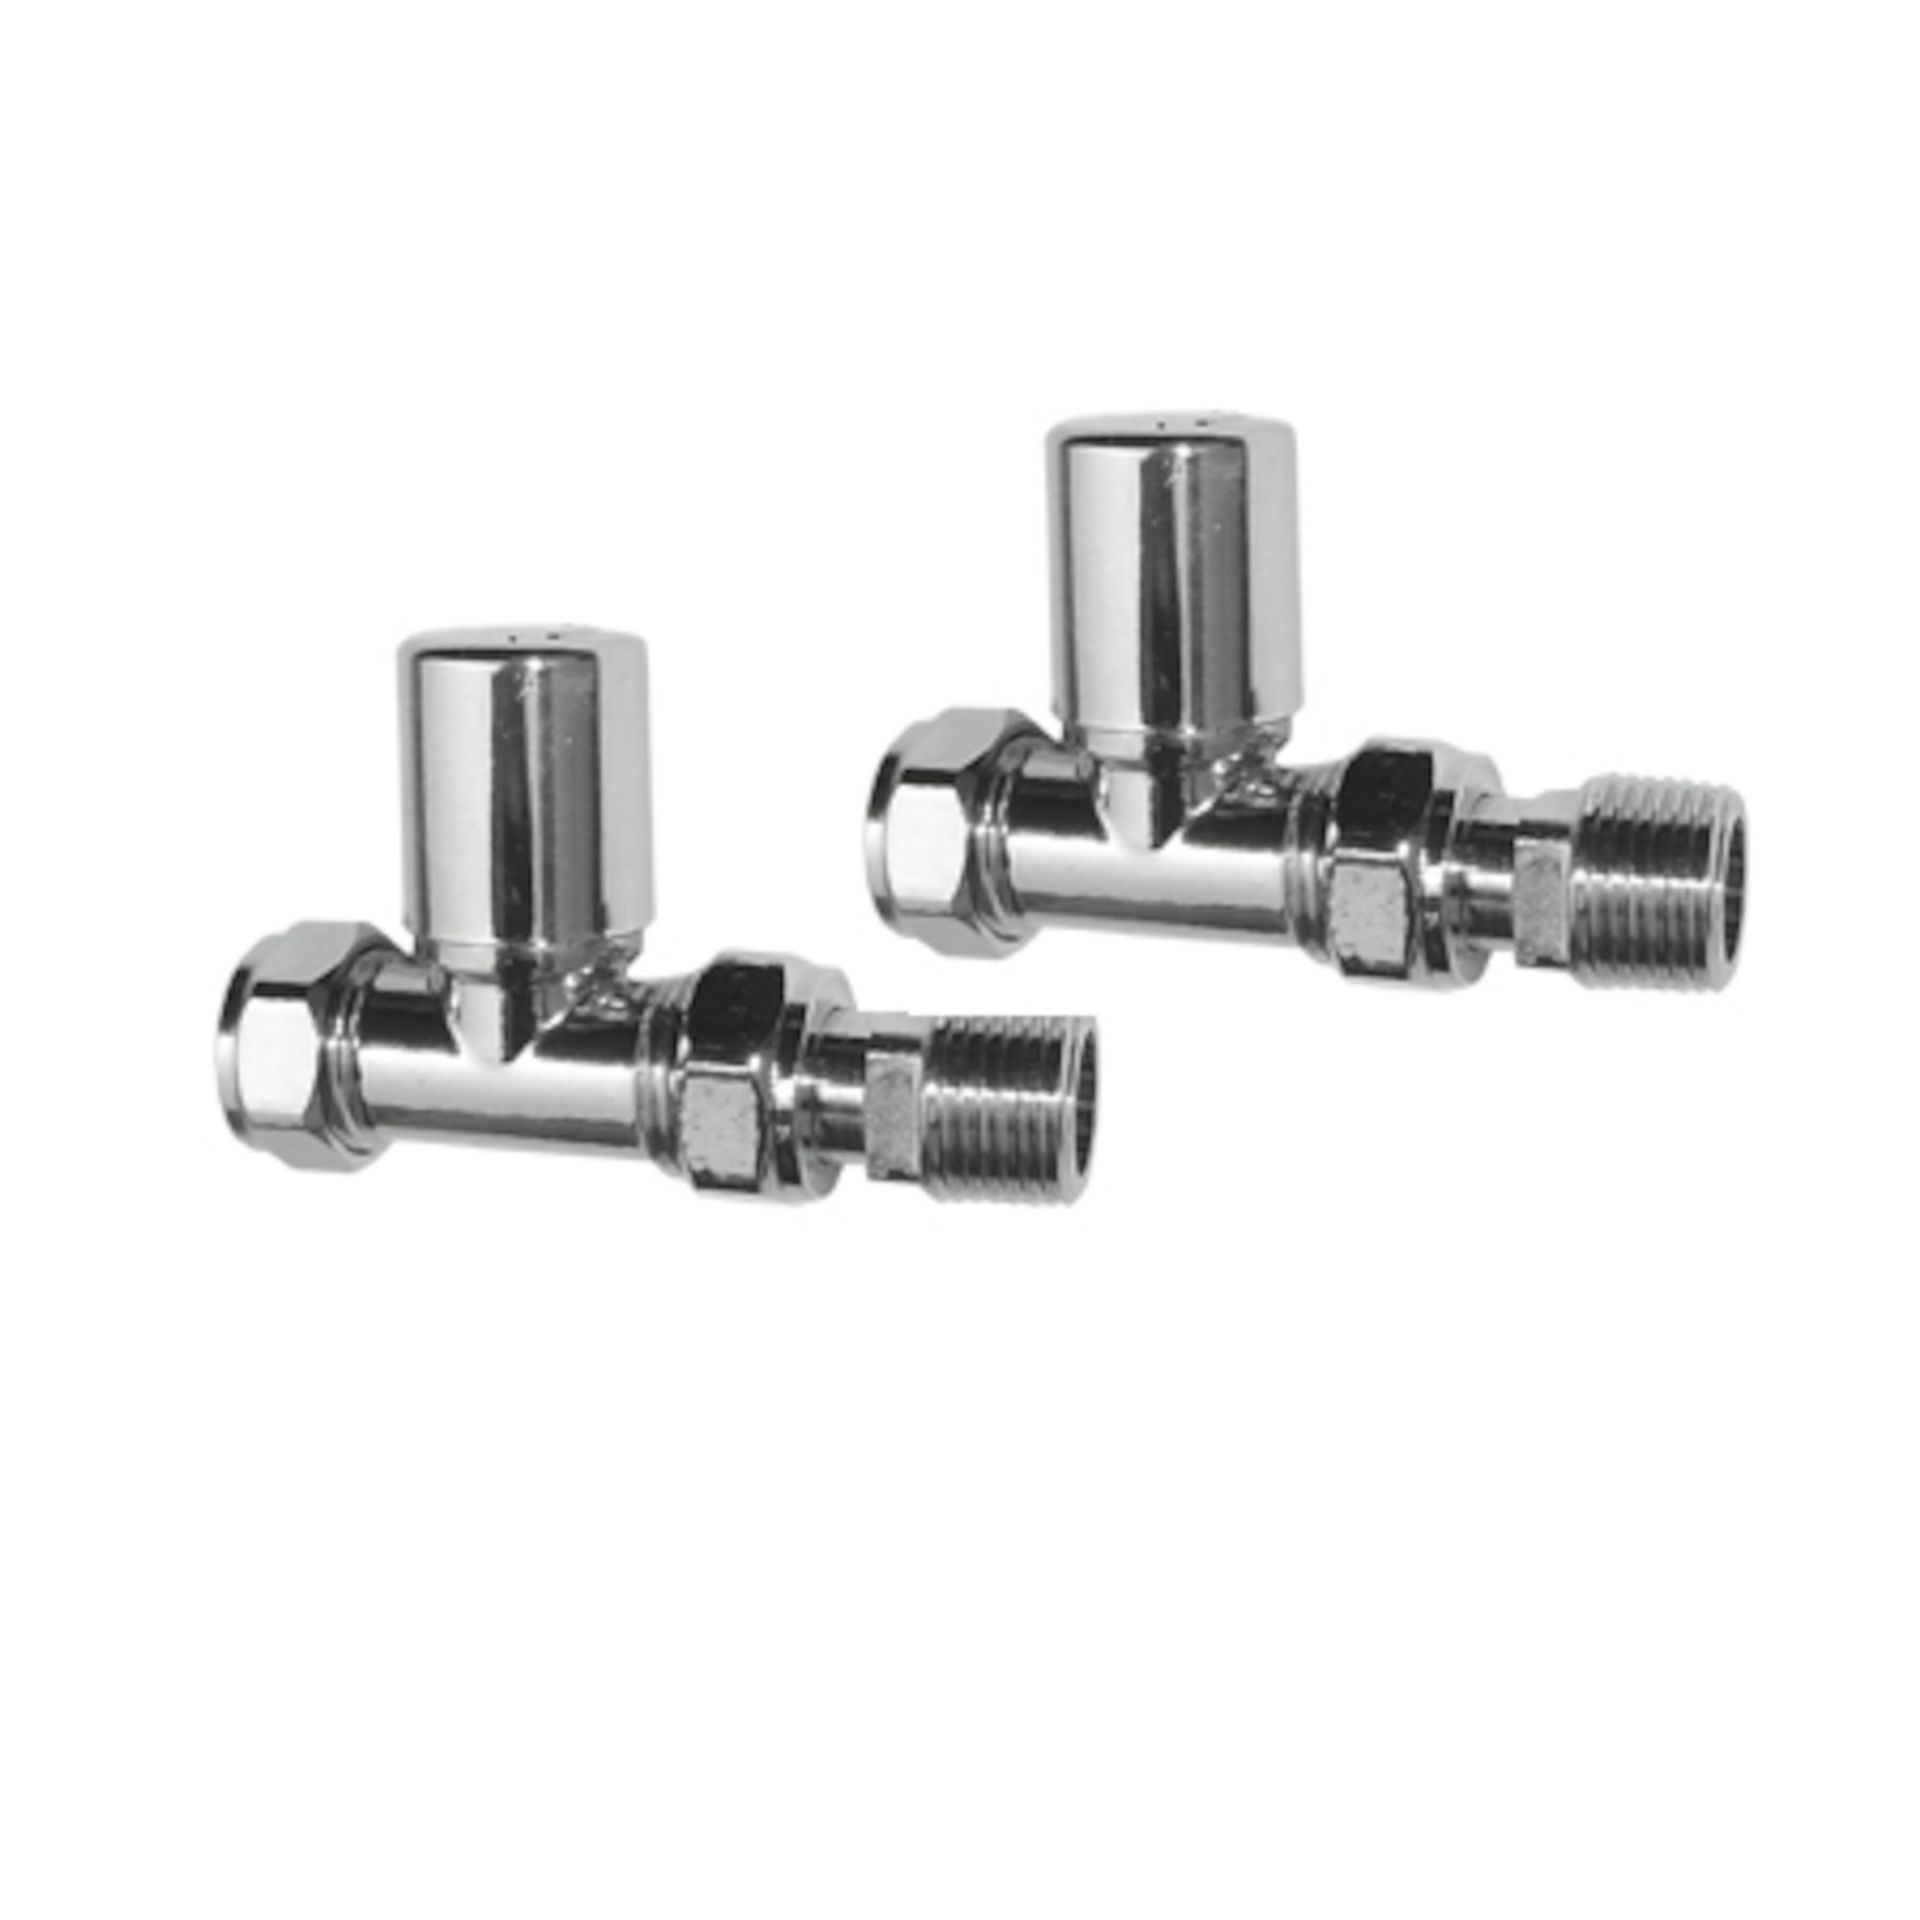 (LU130) Standard 15mm Connection Straight Chrome Radiator Valves Chrome Plated Solid Brass